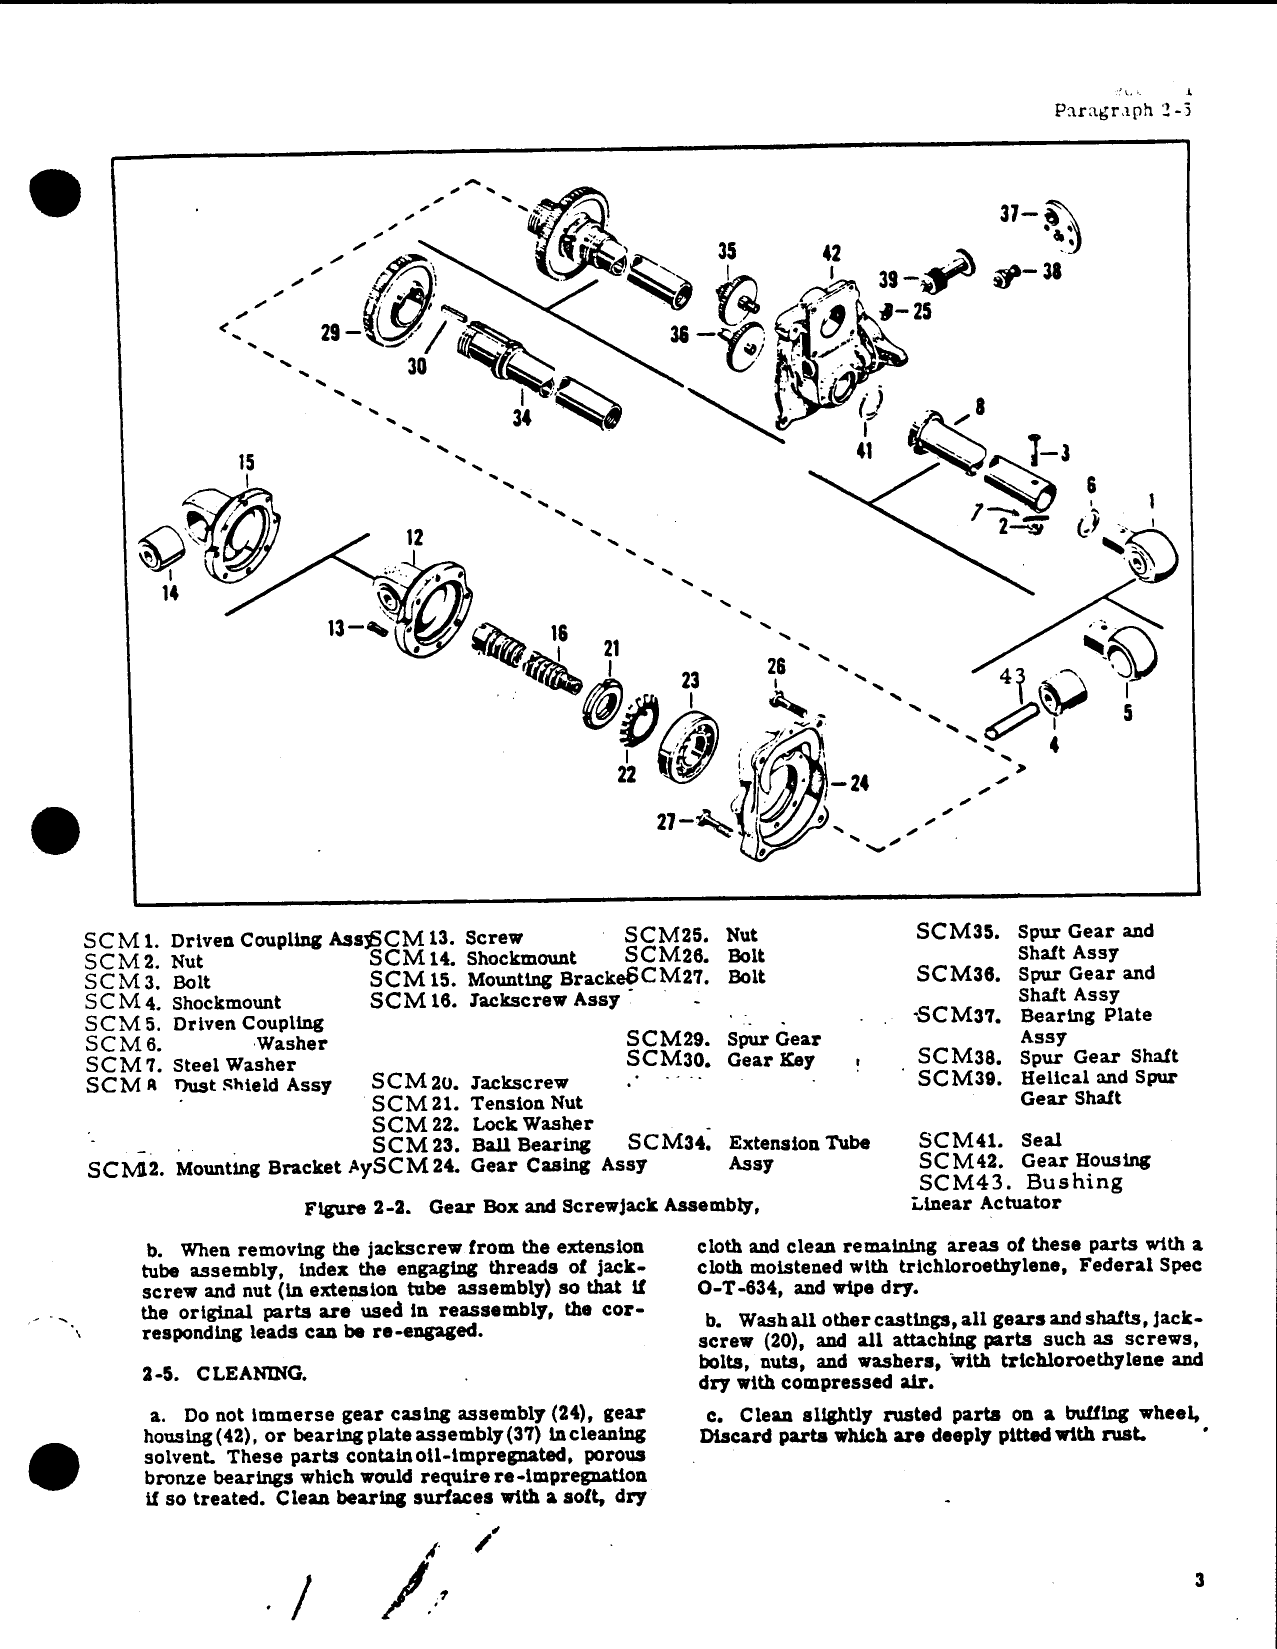 Sample page 4 from AirCorps Library document: Overhaul Inst. with Illustrated Parts Catalog for Actuator 1-2157-1M1 and 4859